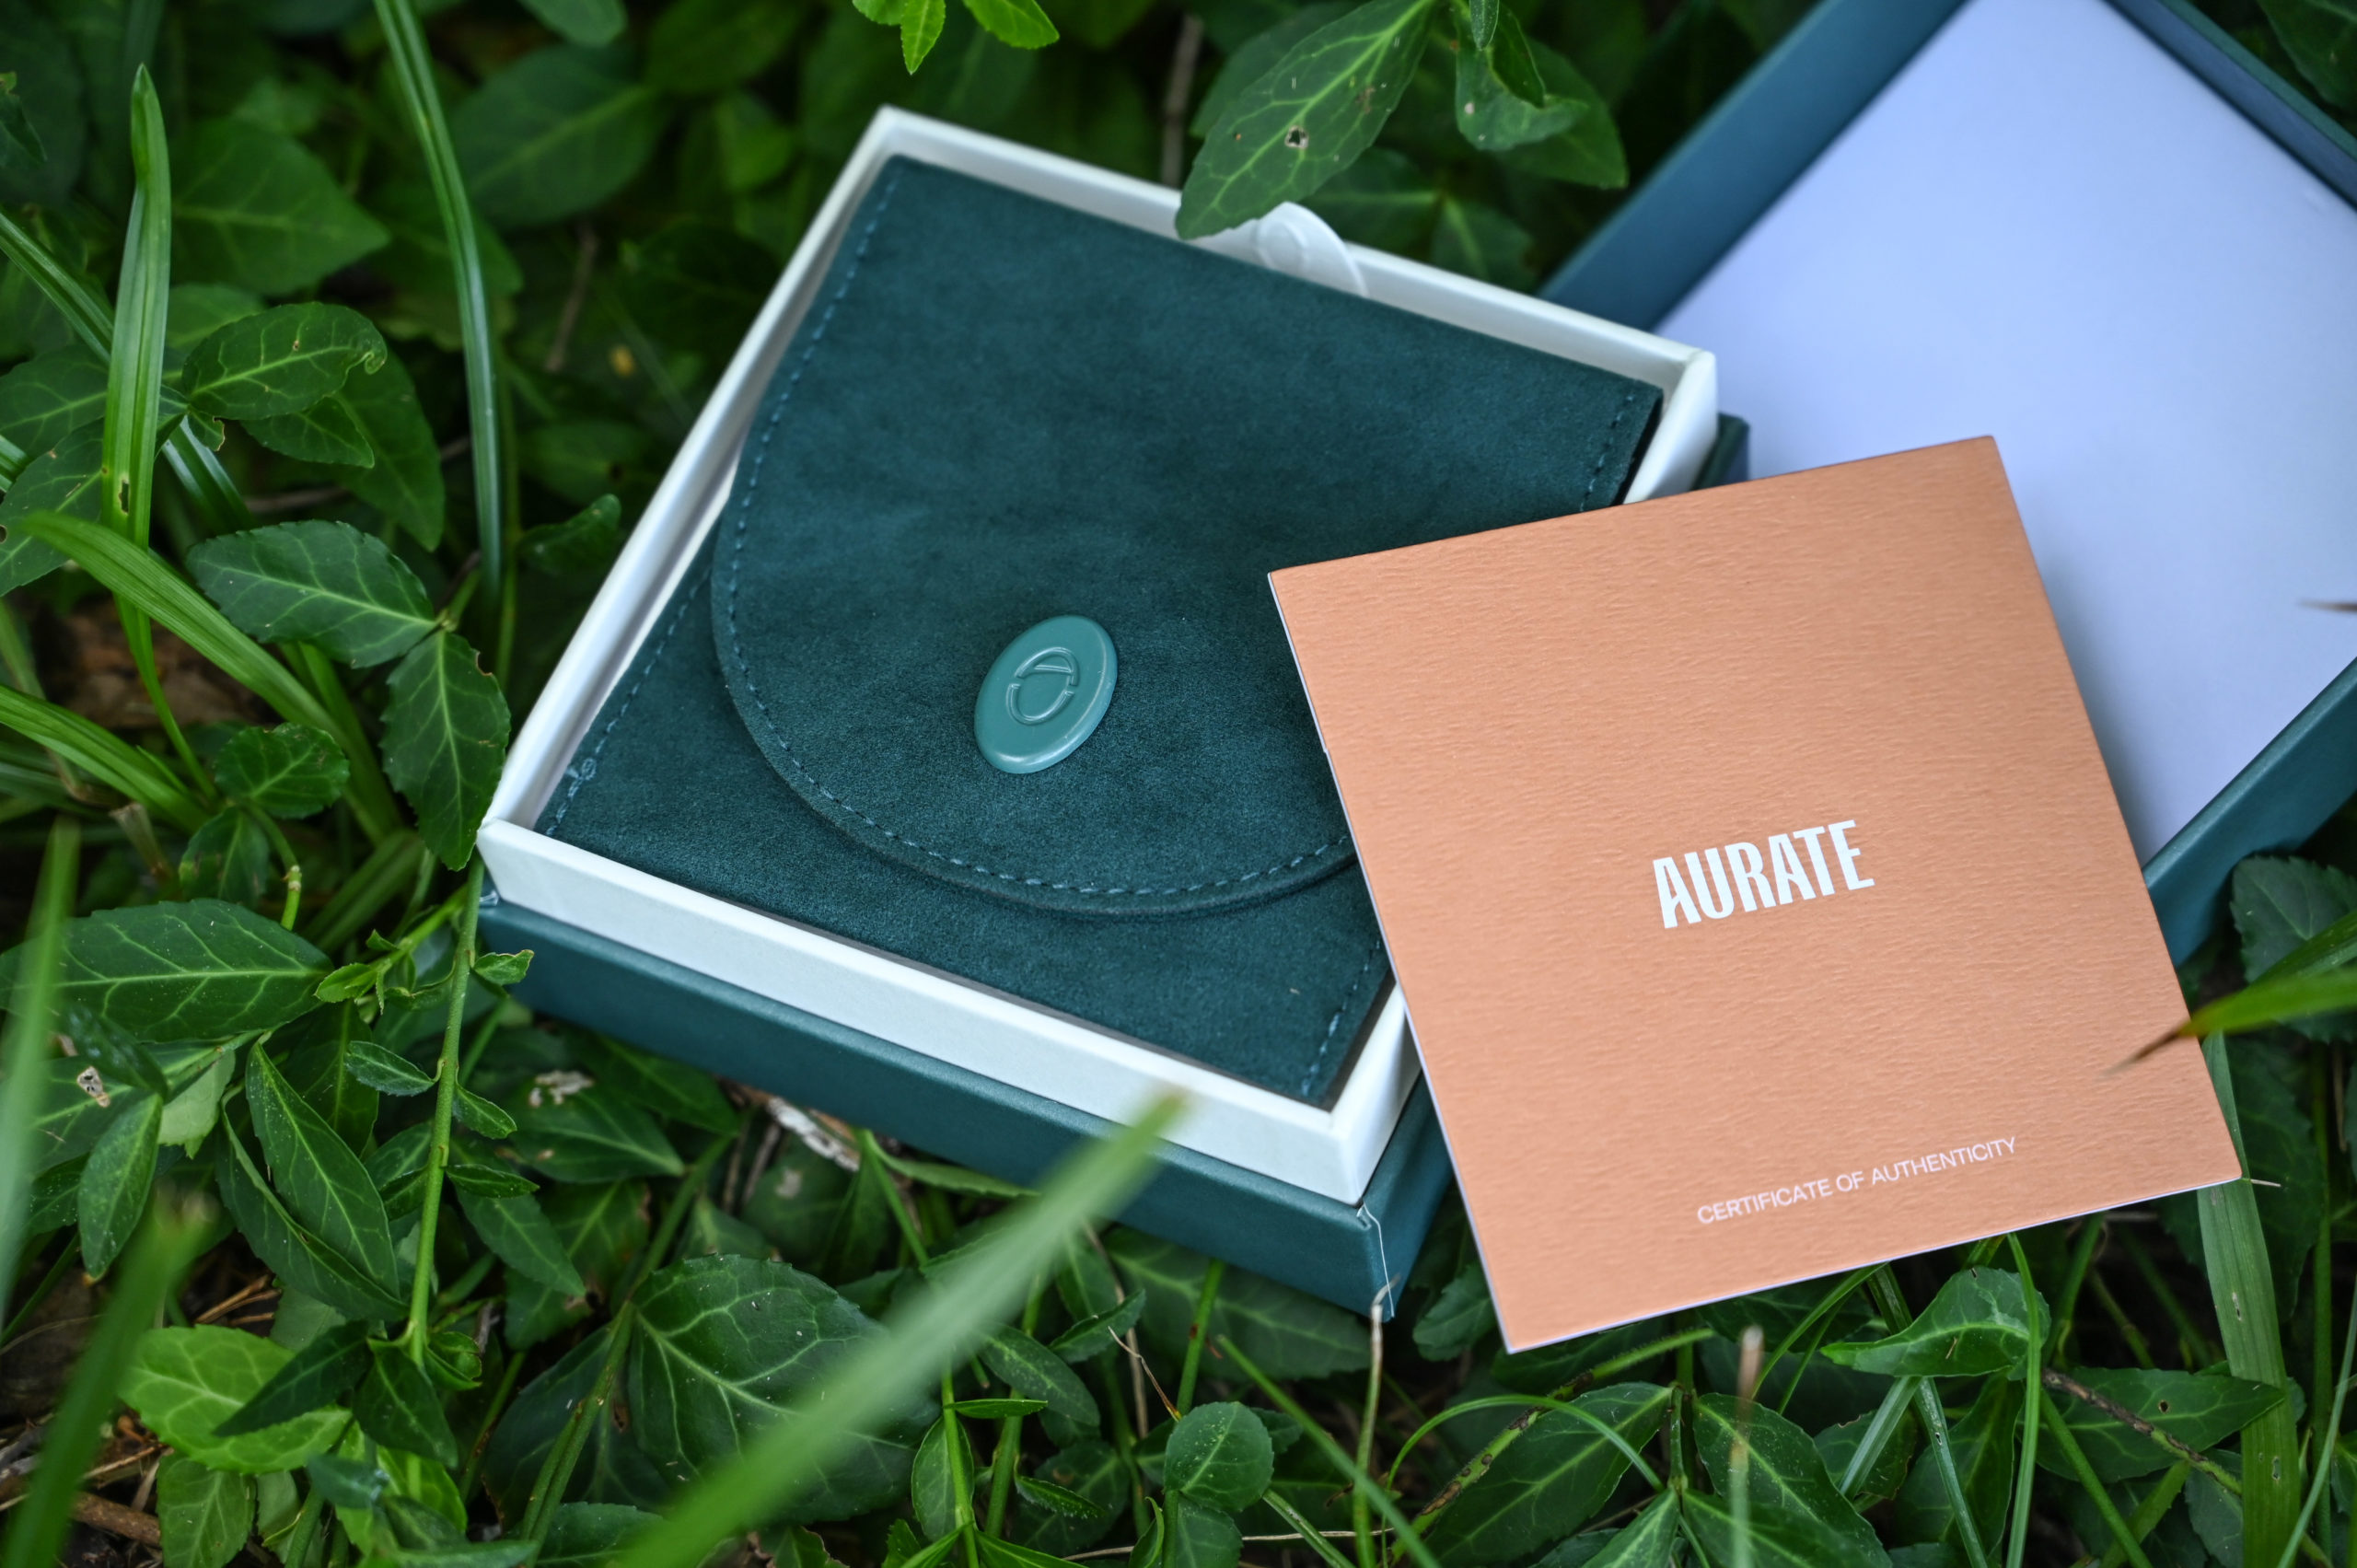 Sustainable & Chic Gold Jewelry with Aurate